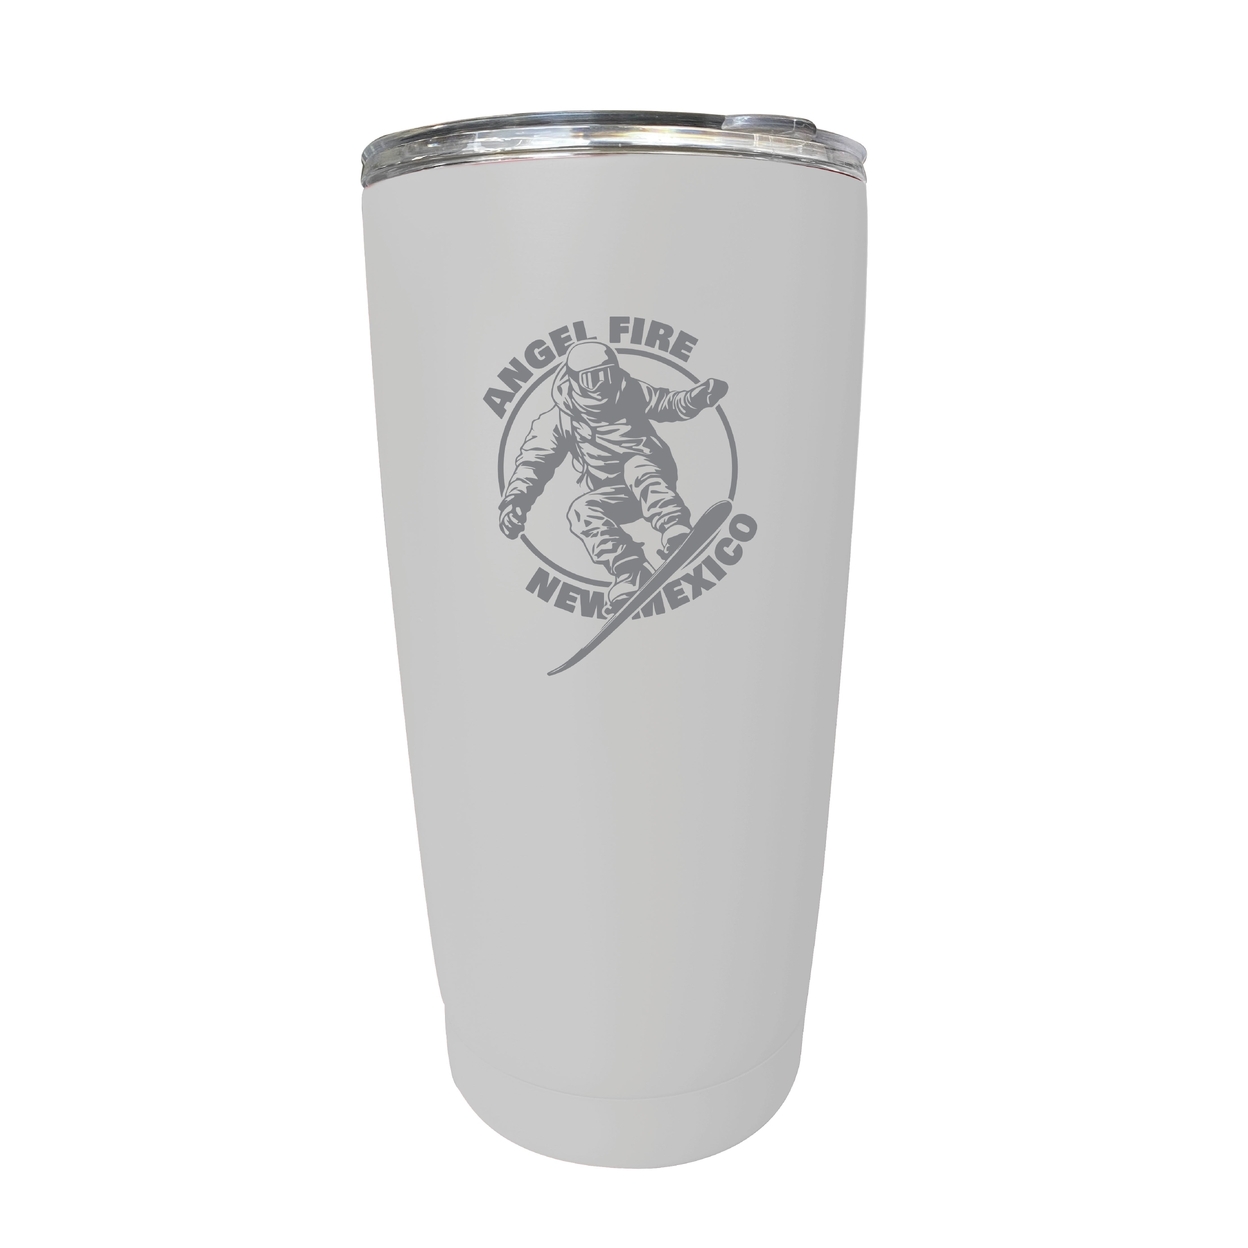 Angel Fire New Mexico Souvenir 16 Oz Engraved Stainless Steel Insulated Tumbler - White,,2-Pack